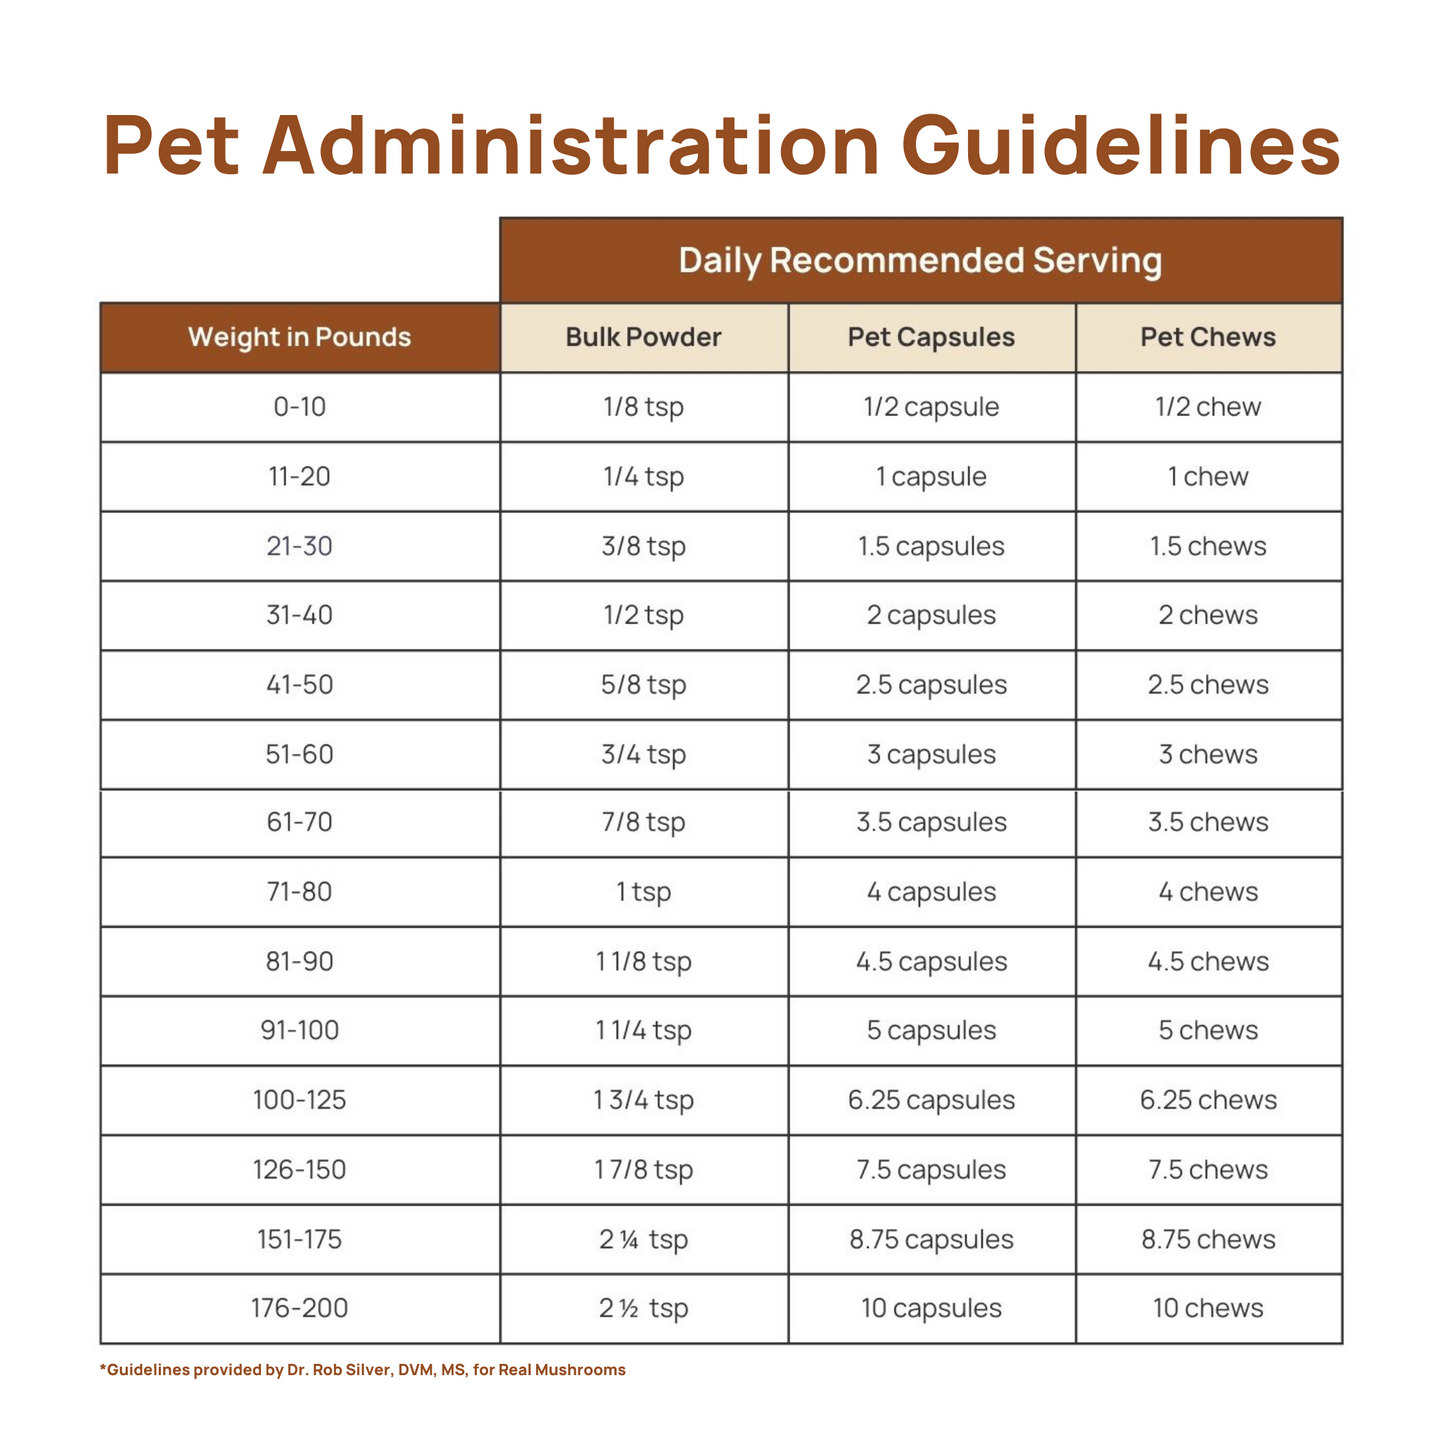 Certified organic Real Mushrooms extracts for pet administration guidelines.